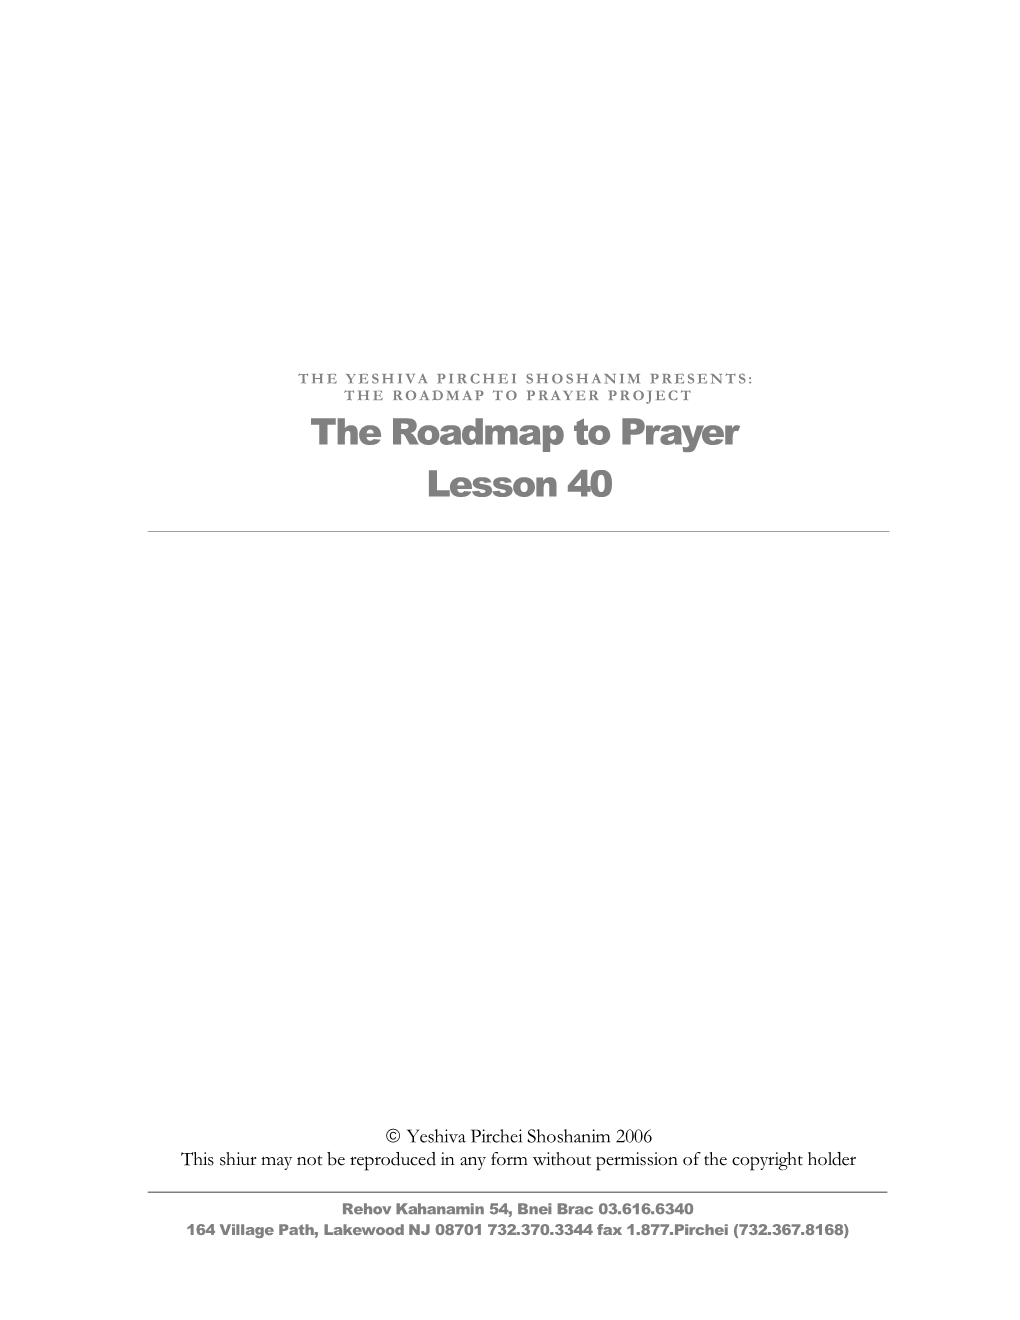 The Roadmap to Prayer Lesson 40